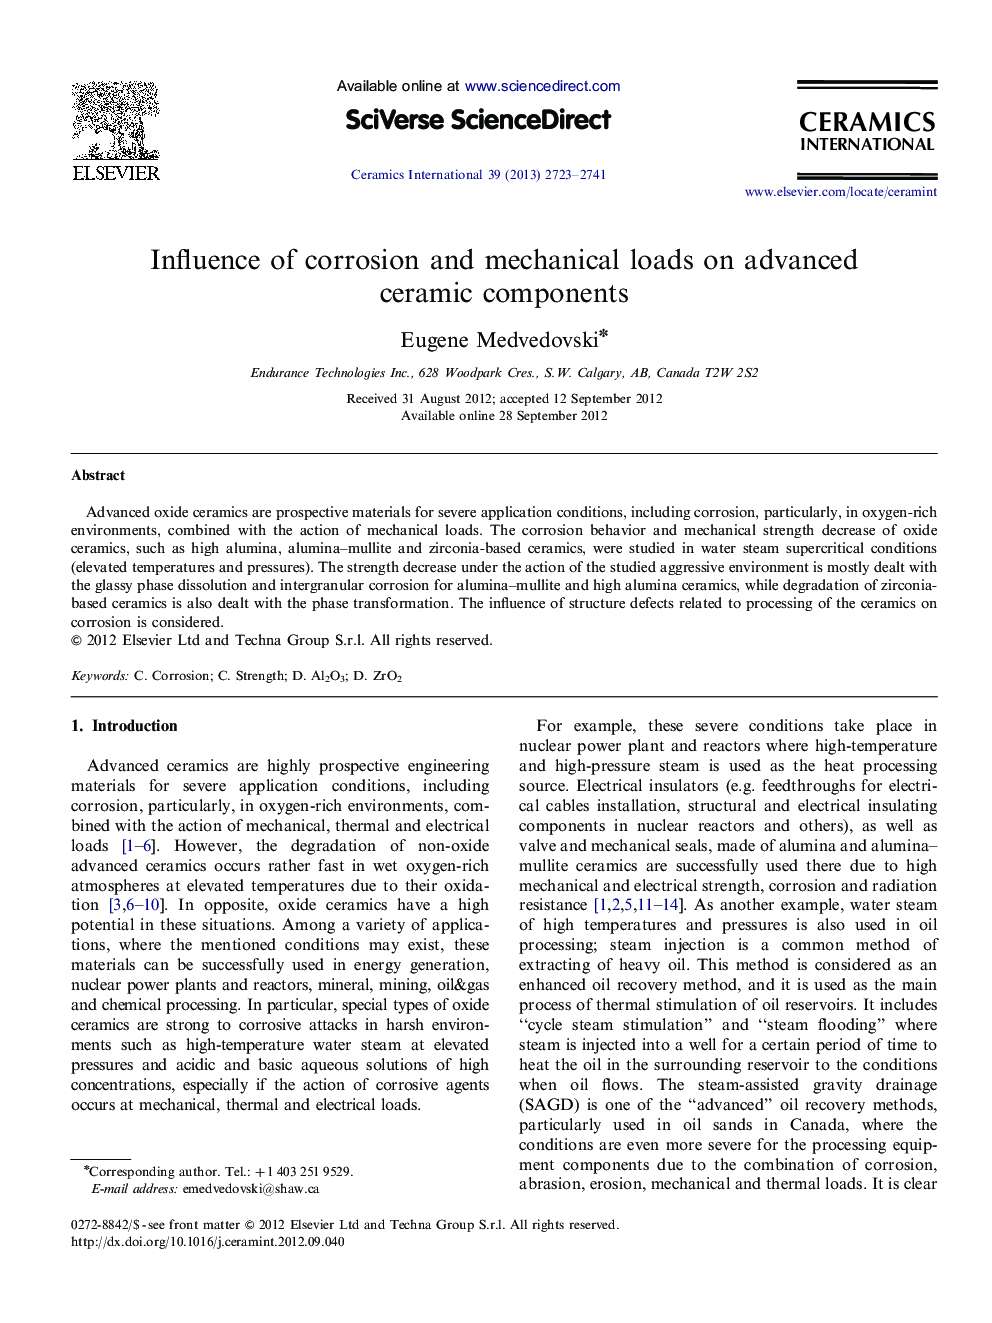 Influence of corrosion and mechanical loads on advanced ceramic components